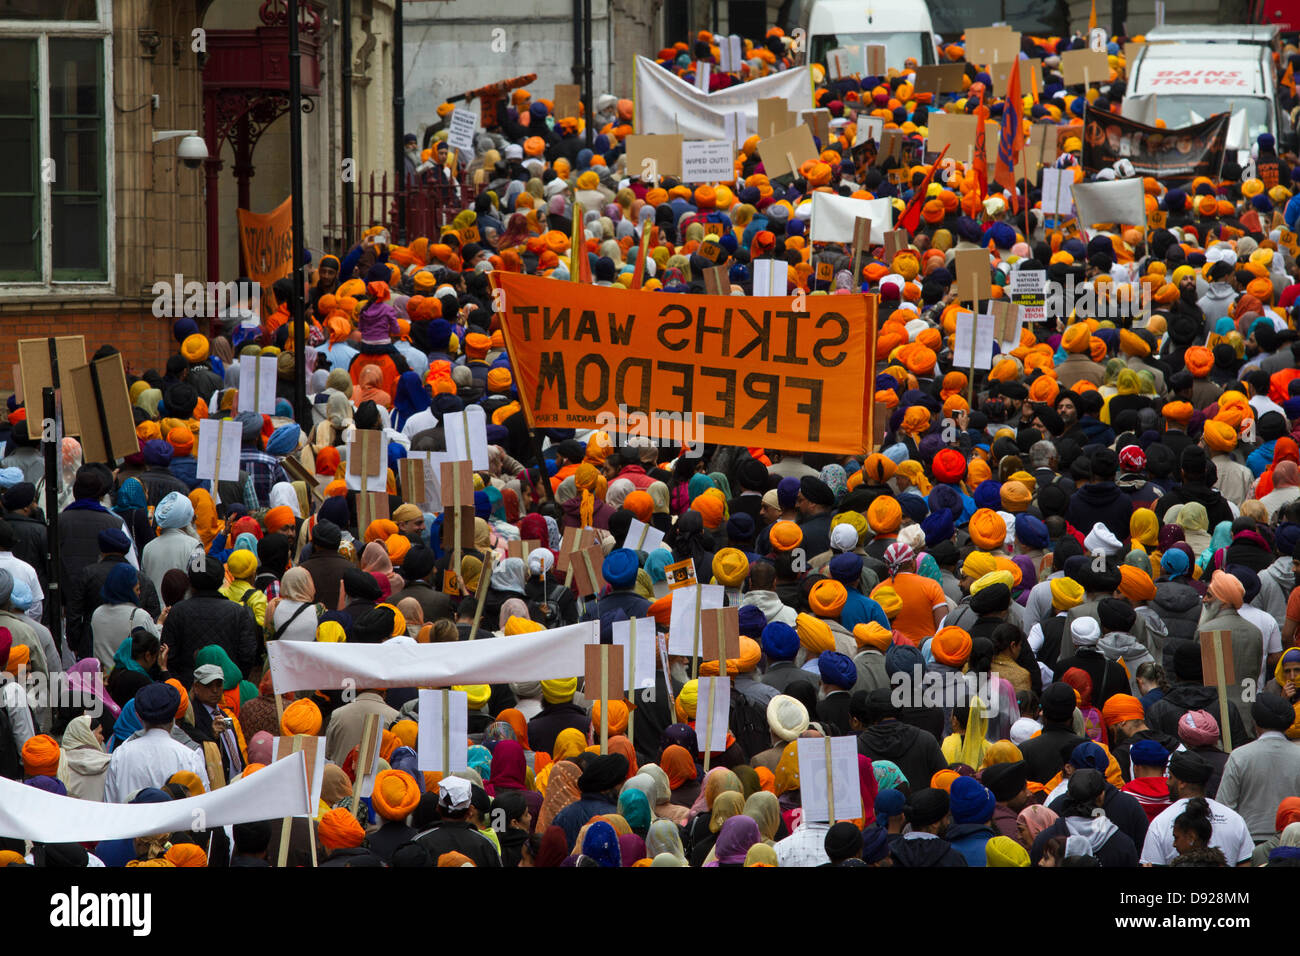 London UK. 9th June 2013. Thousands of Sikhs march in London for justice and freedom to demand an end to human right injustices by the Indian Government and to remember the victims of Amritsar during The 1984 anti-Sikh riots, in response to the assassination of Indira Gandhi by Sikh bodyguards Credit:  amer ghazzal/Alamy Live News Stock Photo